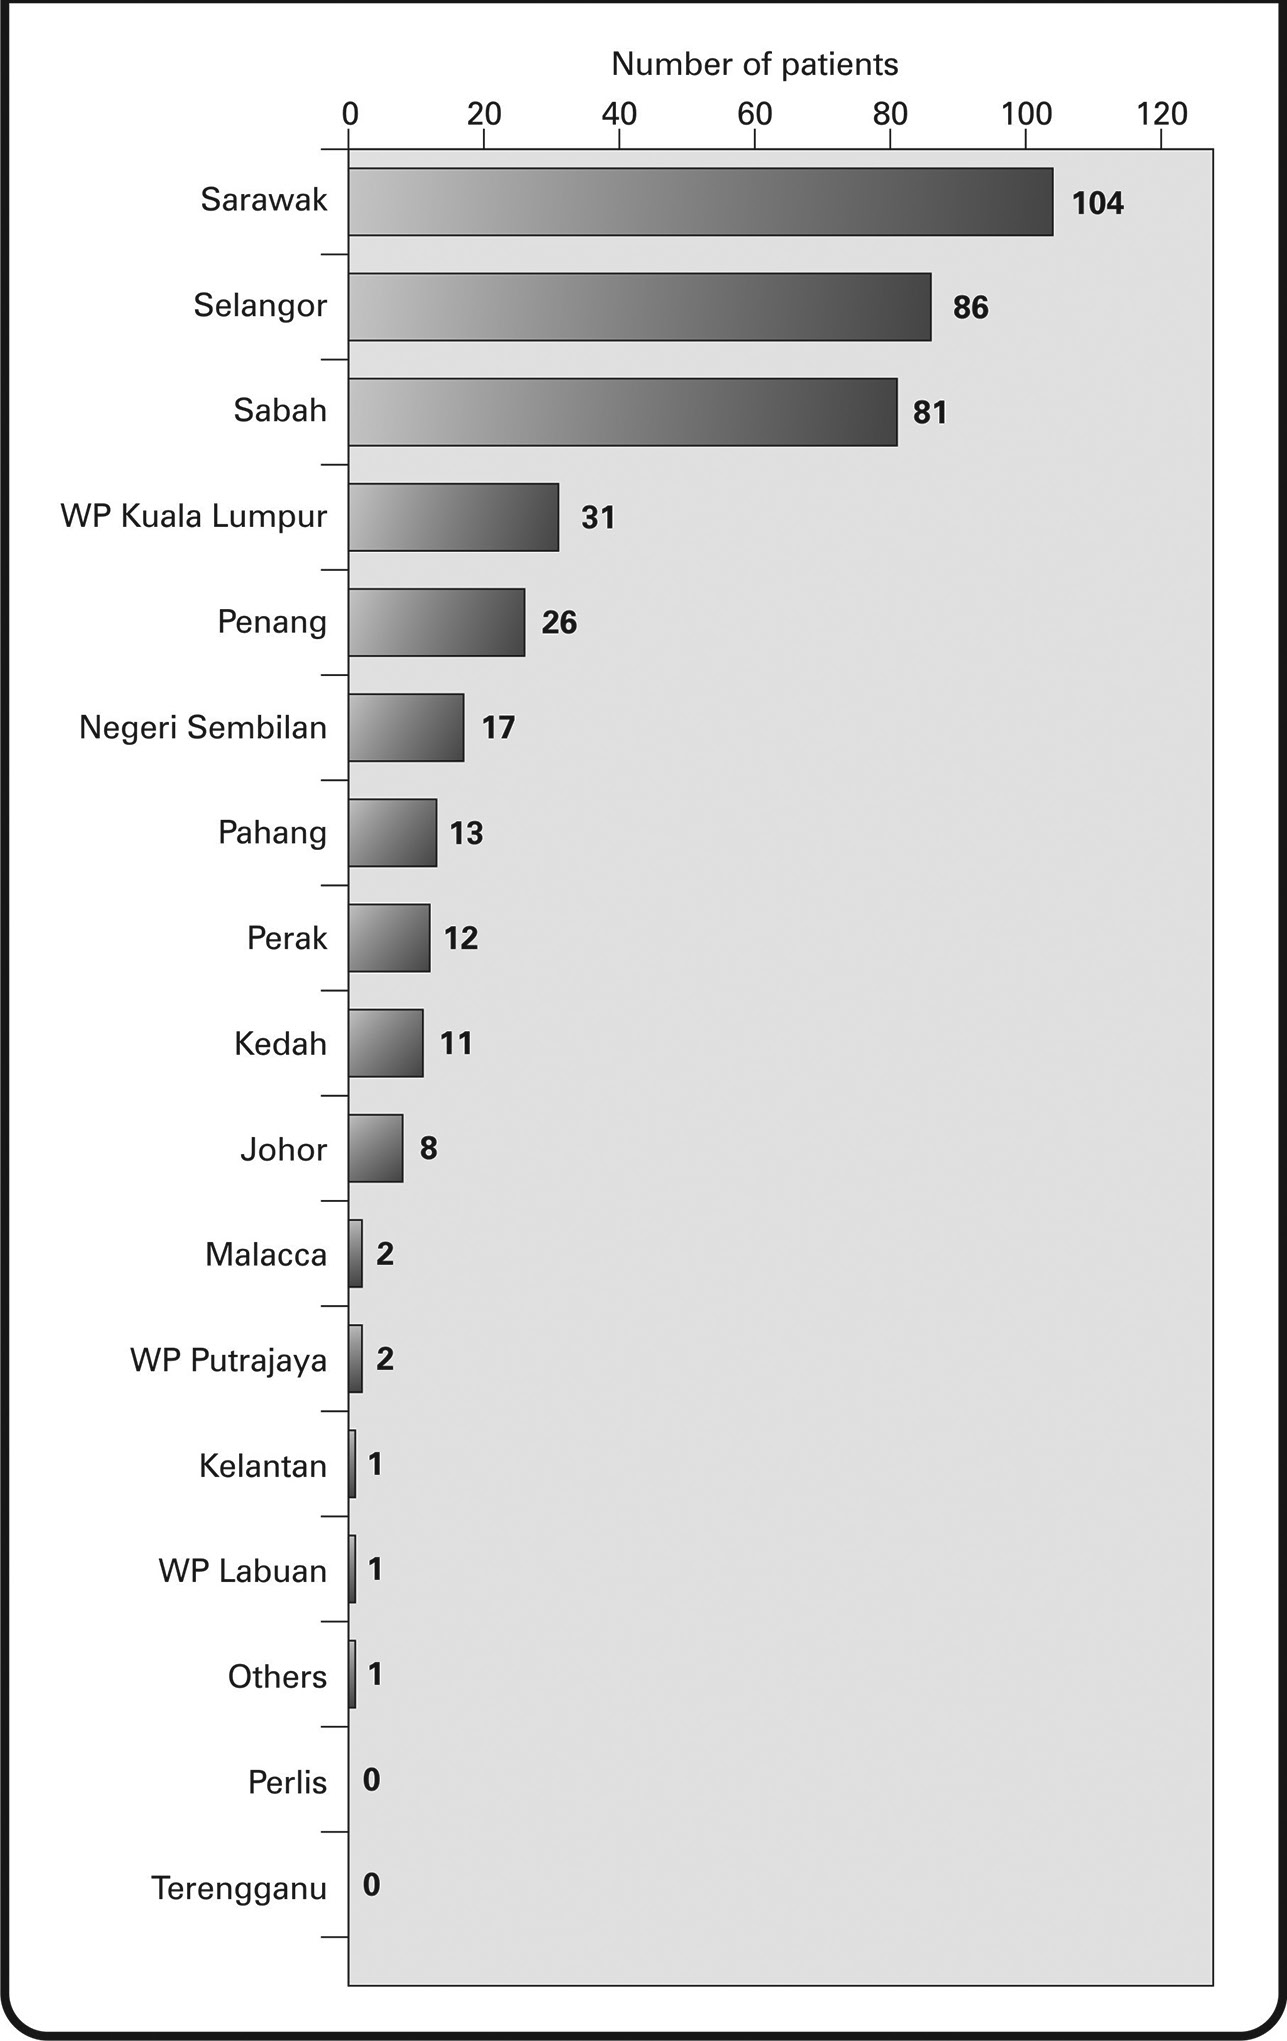 Fig. 2 Human epidermal growth factor receptor 2+ breast cancer patient’ distribution, by state, in Malaysia.